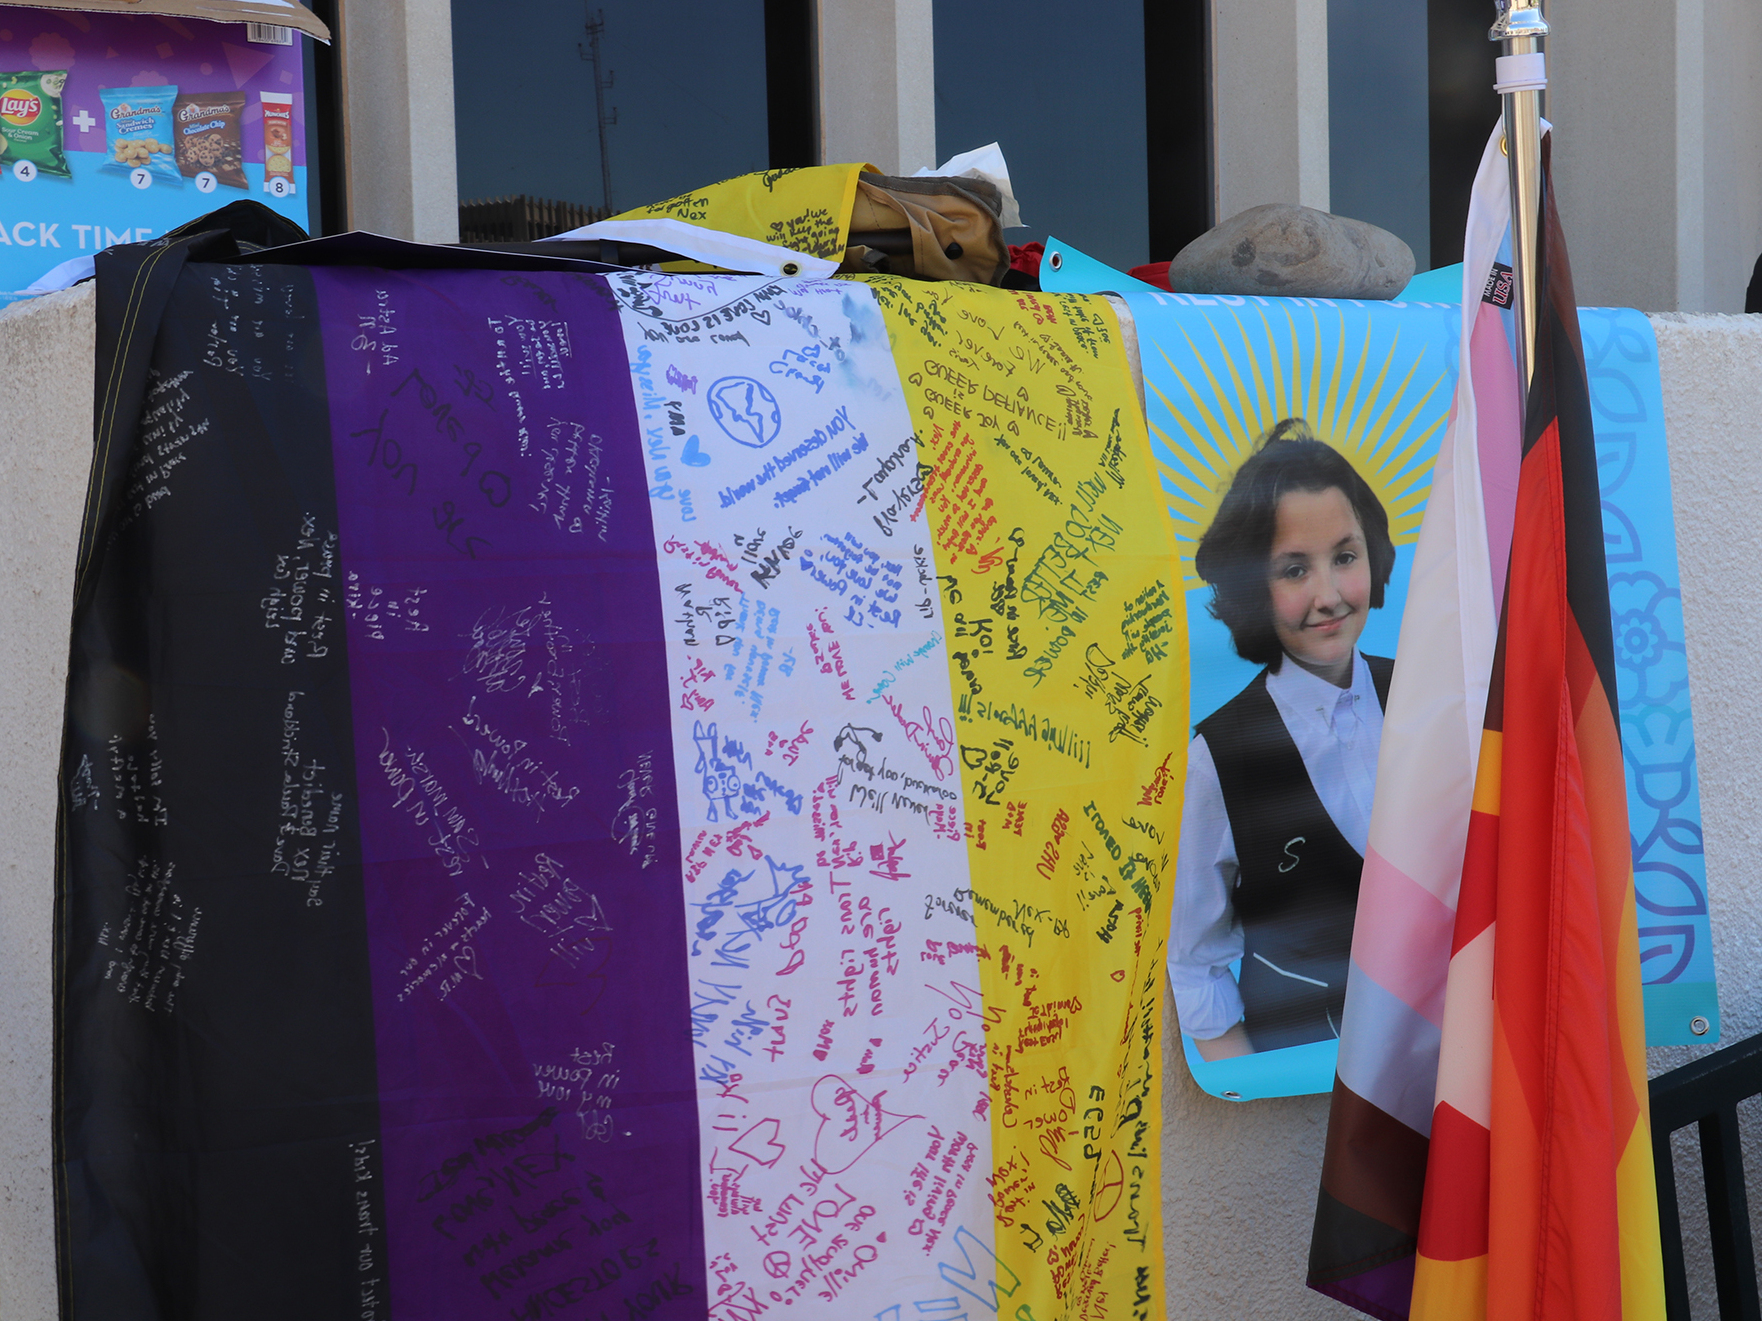 A portrait of Oklahoma teenager Nex Benedict, who died in March, hangs next to a nonbinary pride flag signed by demonstrators outside the Oklahoma State Department of Education last month.